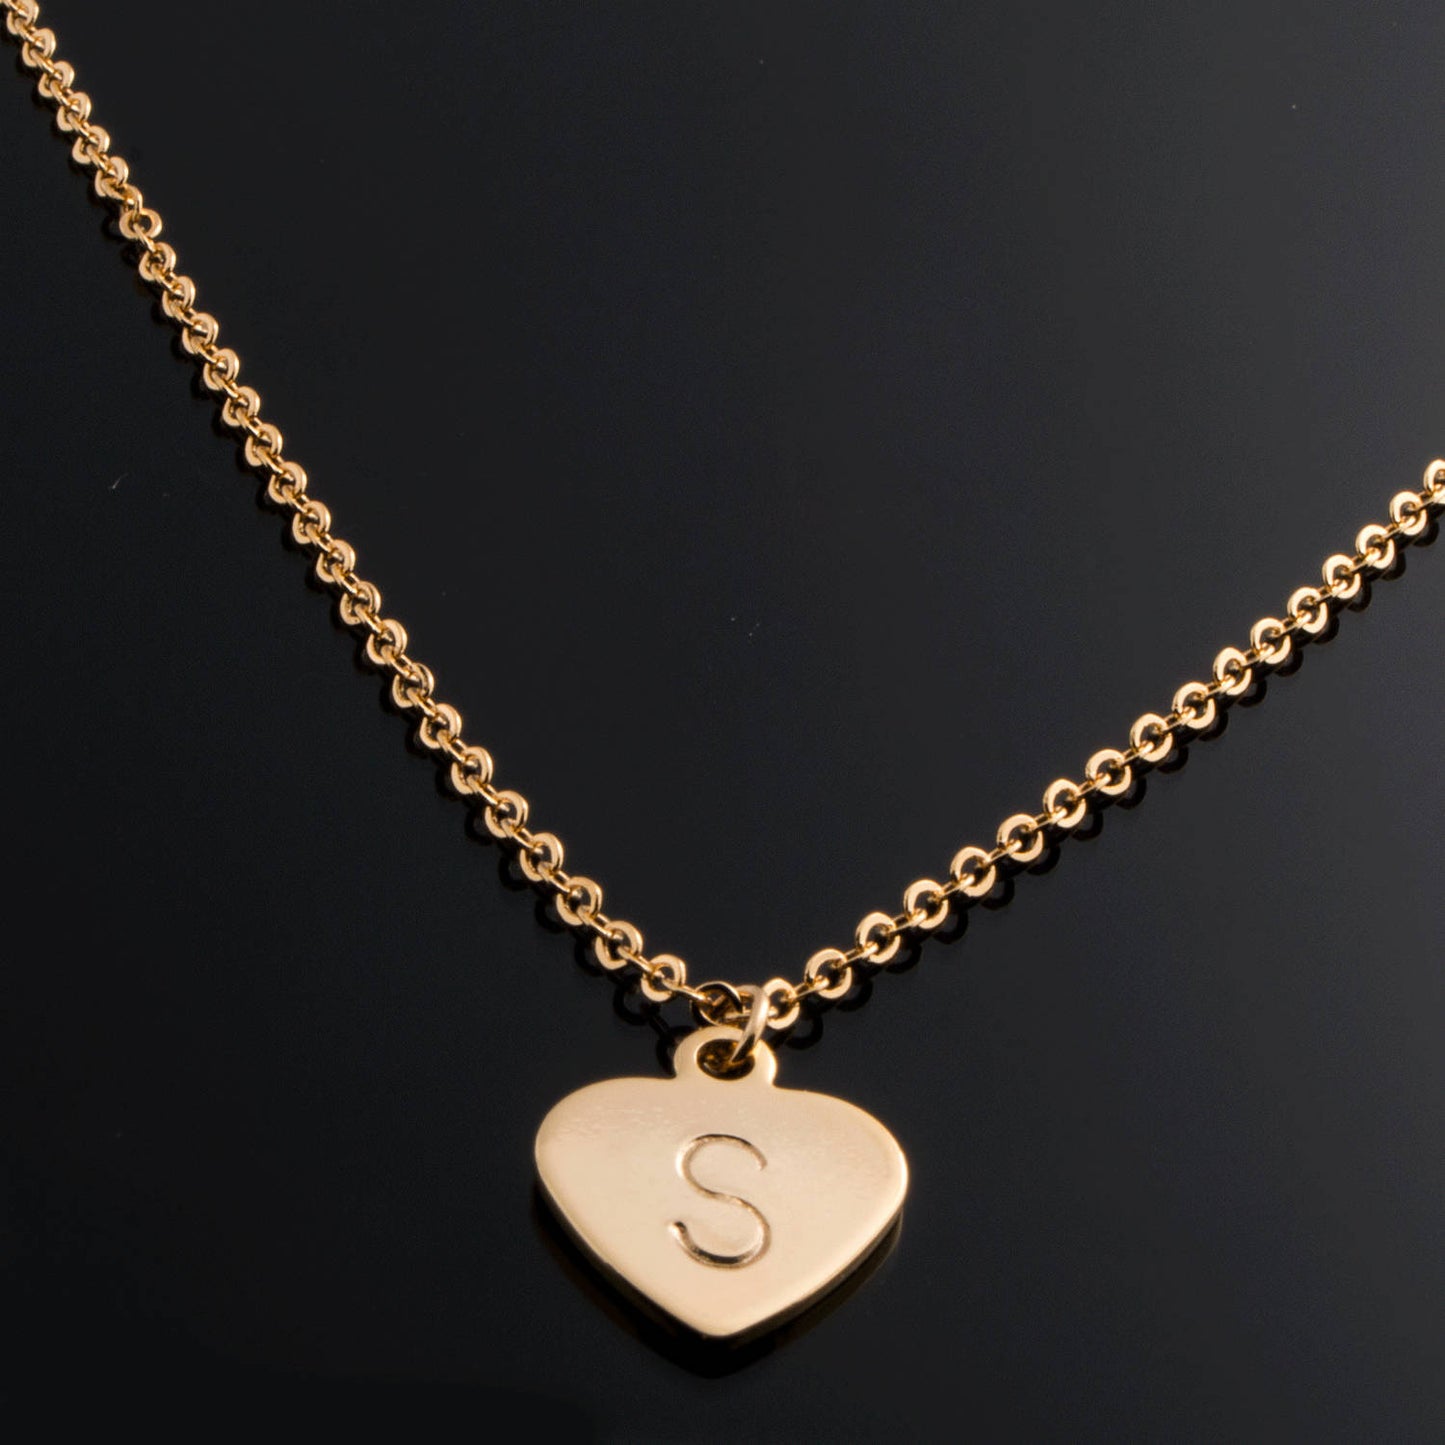 Hand Stamped Heart Charm Initial Necklace